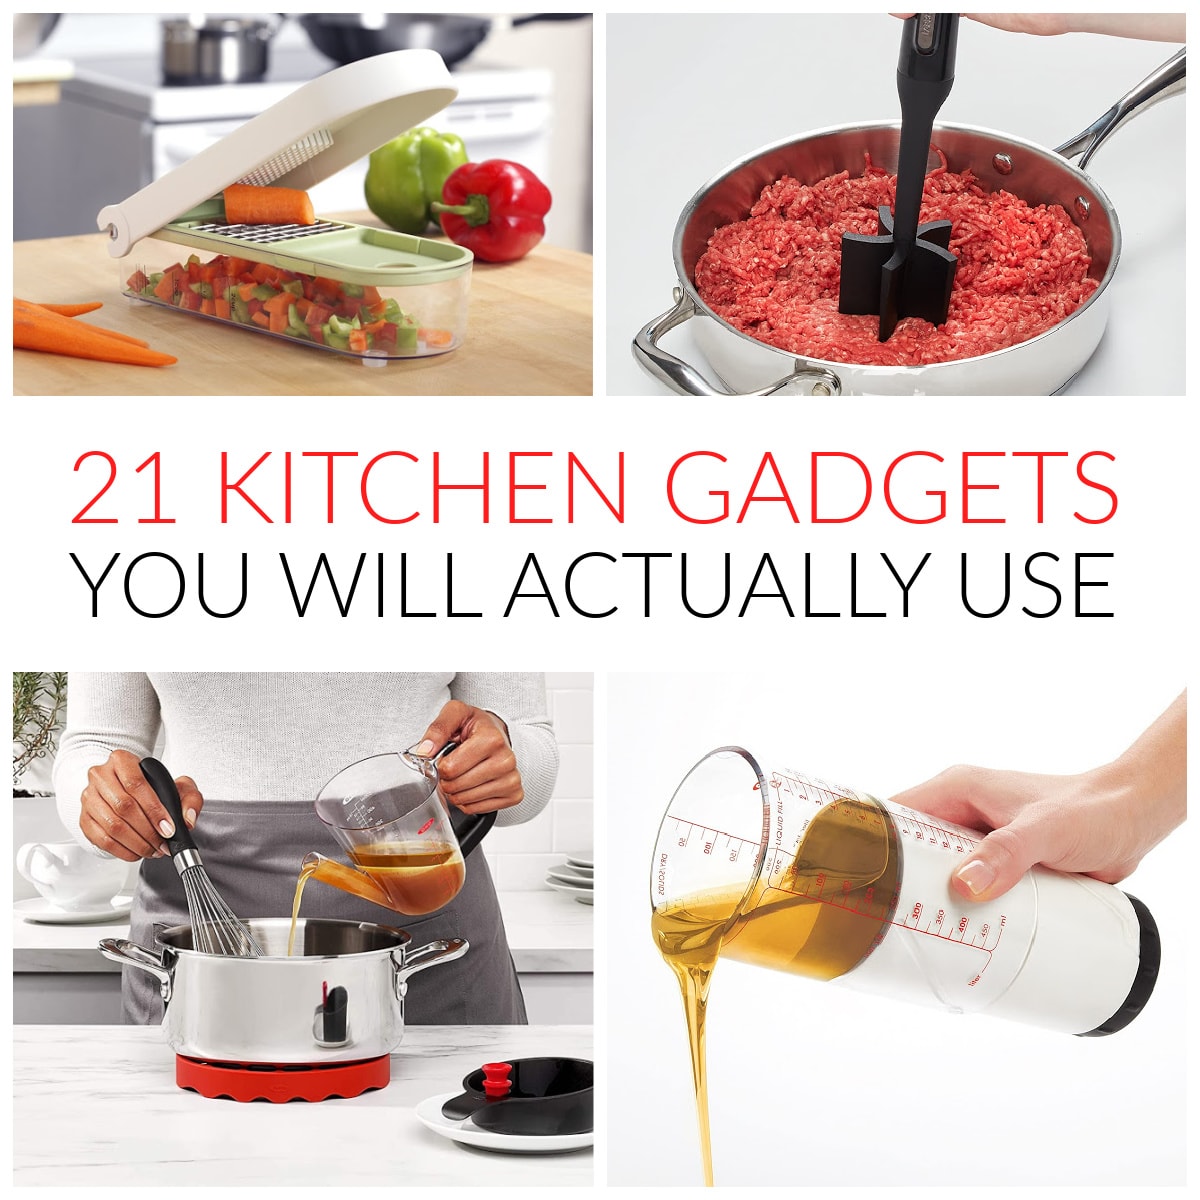 Why wacky kitchen gadgets are all the rage, according to a gourmet